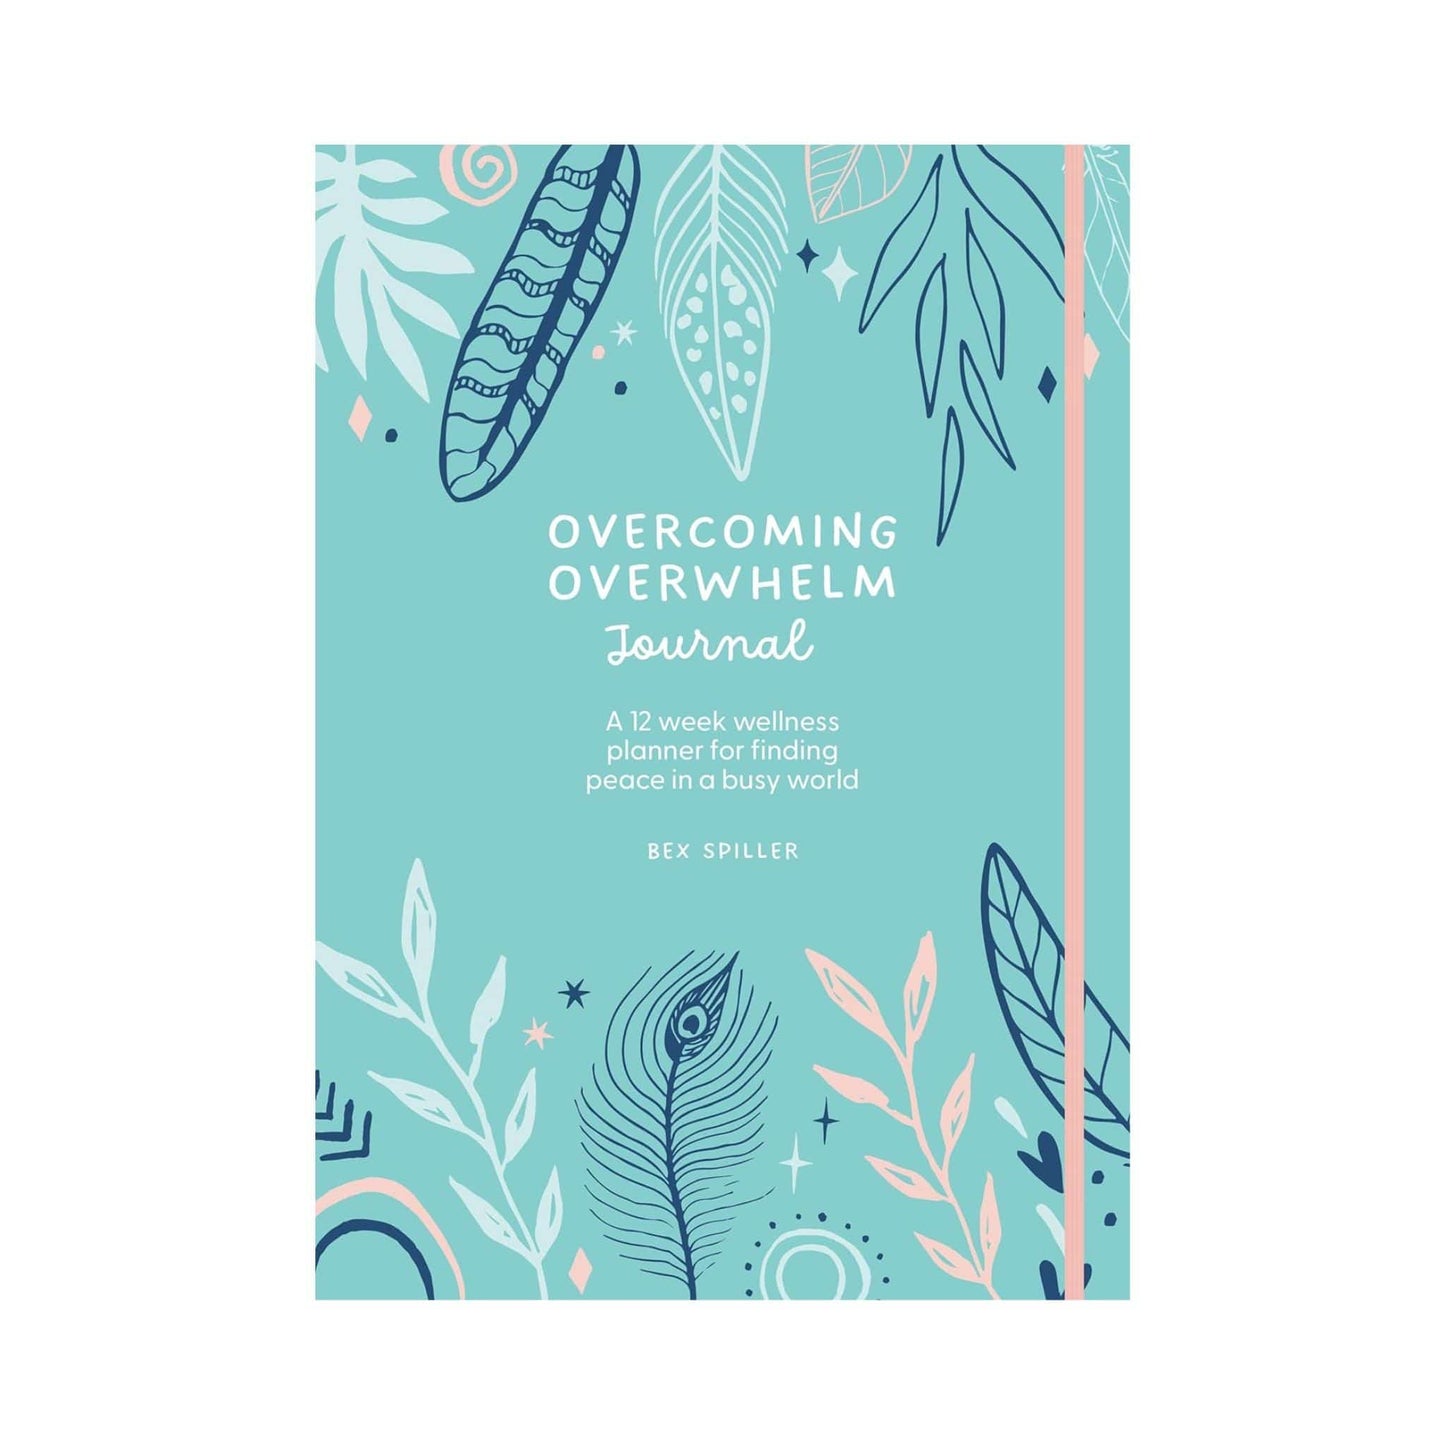 Our Bookshelf Print Books Overcoming Overwhelm Journal: A 12-Week Wellness Planner for Finding Peace in a Busy World